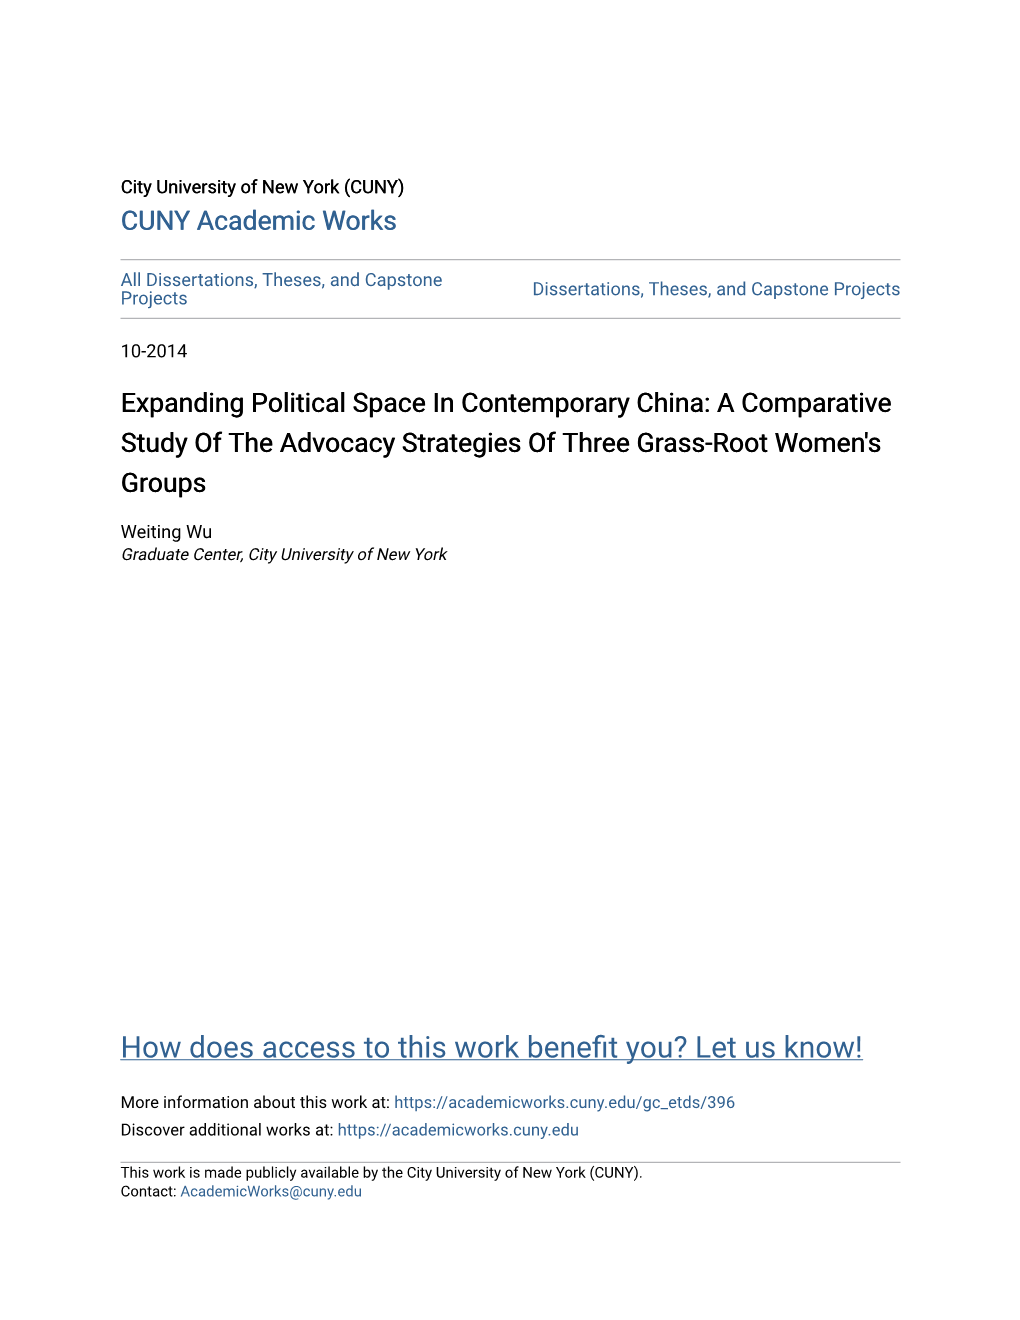 Expanding Political Space in Contemporary China: a Comparative Study of the Advocacy Strategies of Three Grass-Root Women's Groups